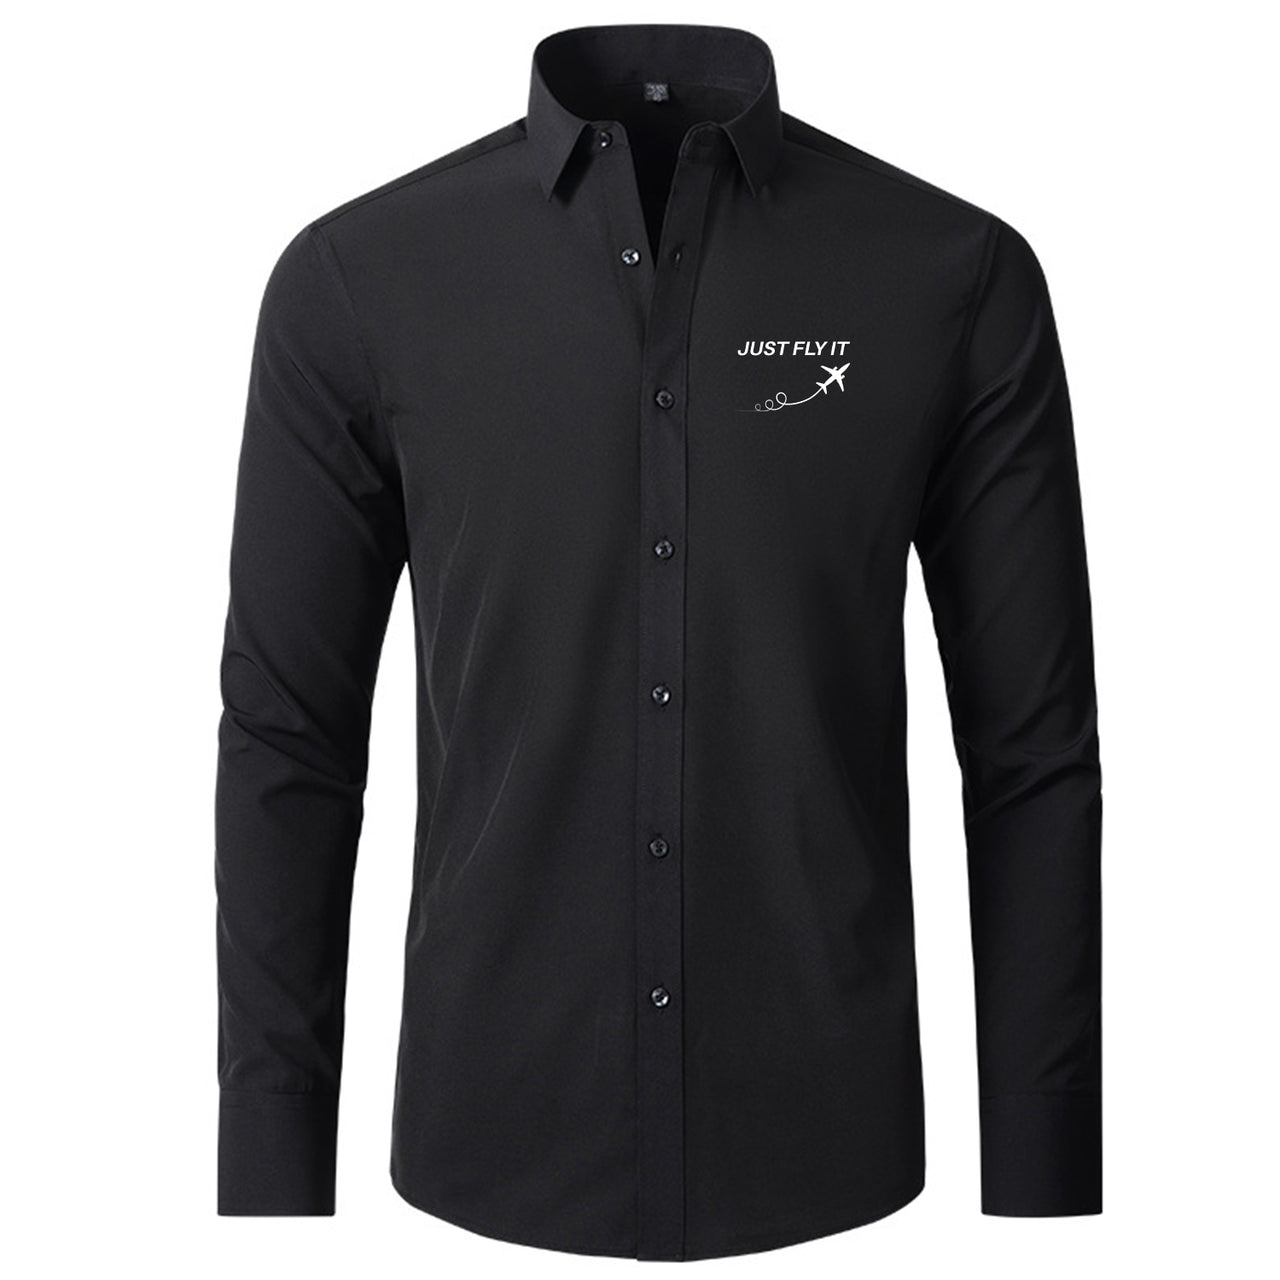 Just Fly It Designed Long Sleeve Shirts